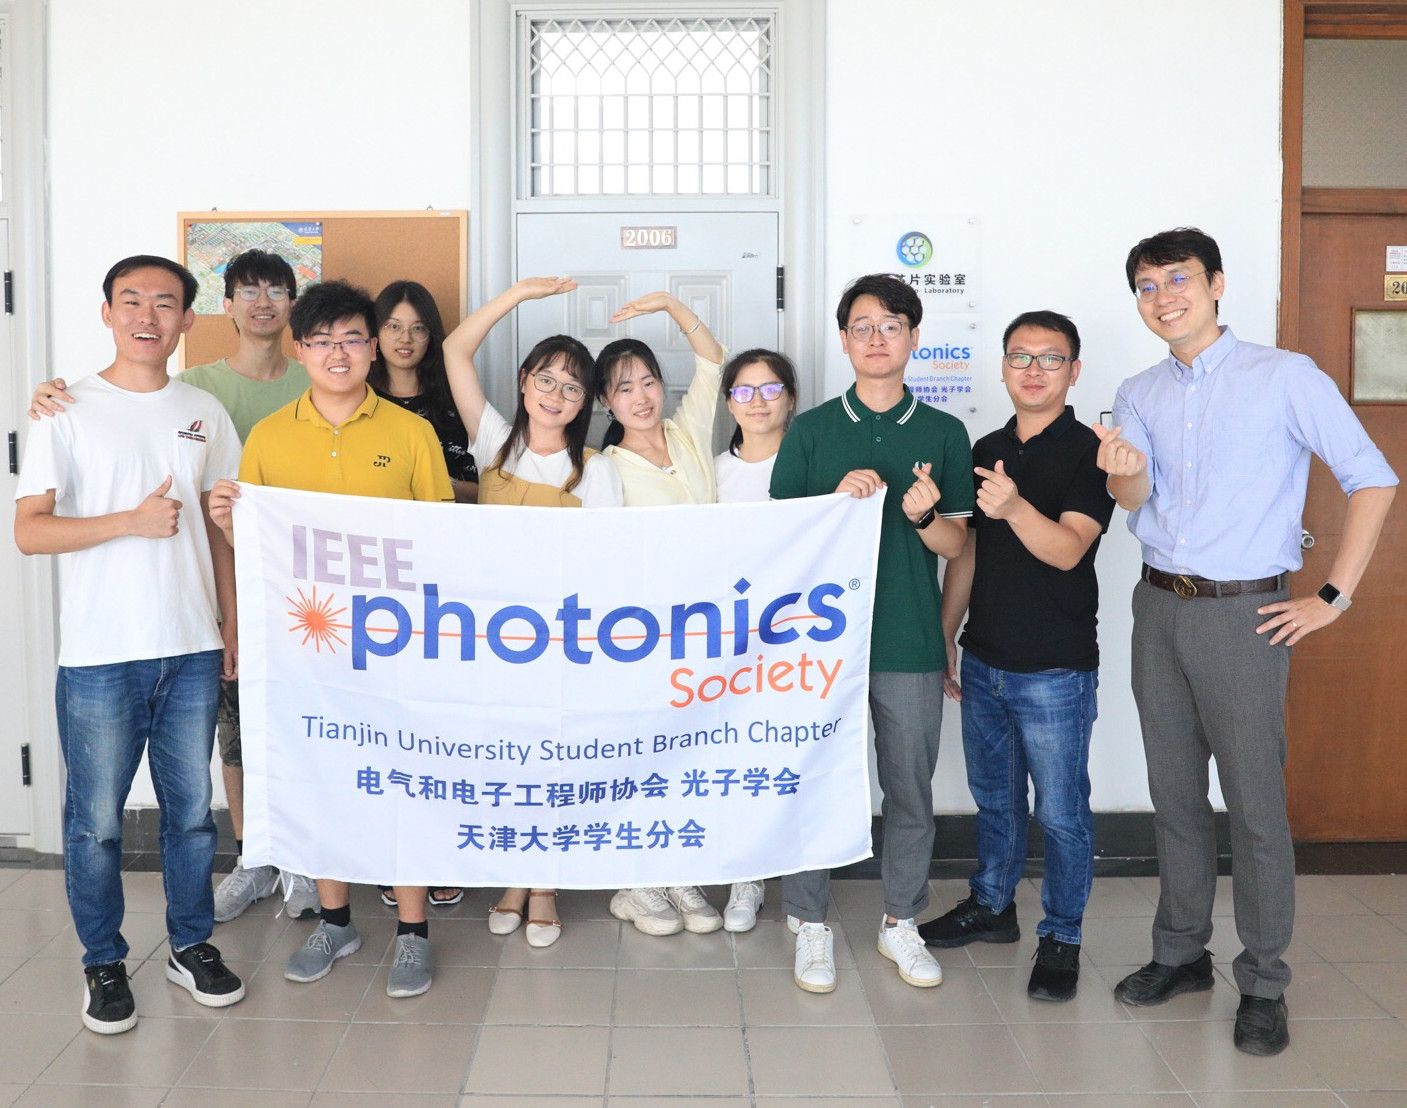 Opening ceremony of IEEE Photonics Society Tianjin University Student Branch Chapter (2019)